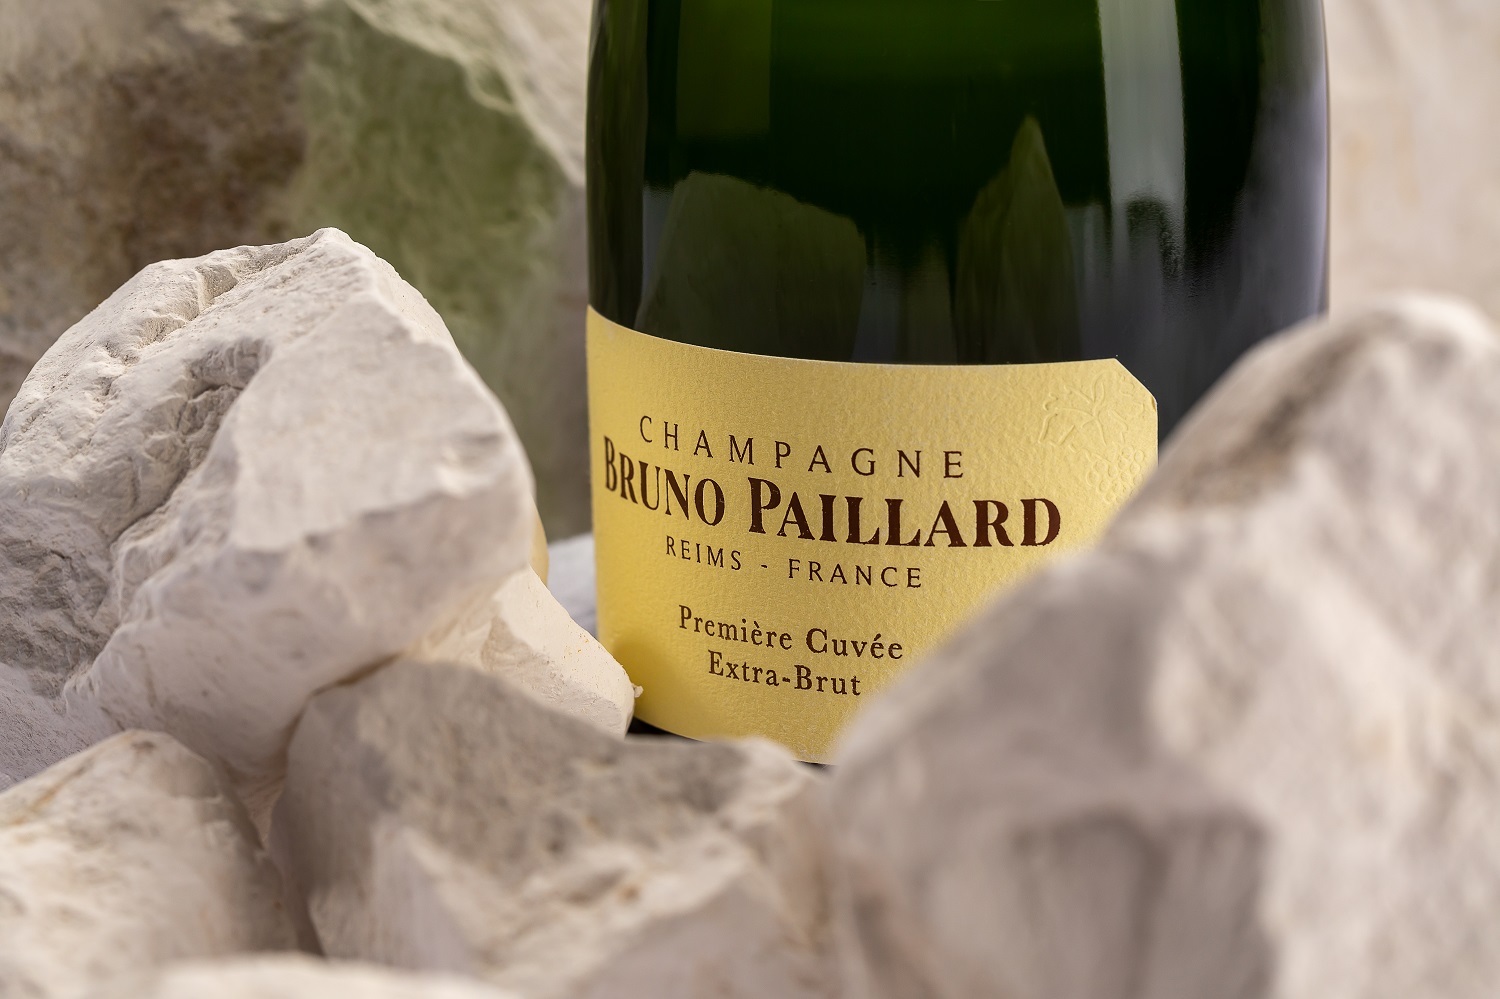 Bruno Paillard produce a selection of excellent Champagnes